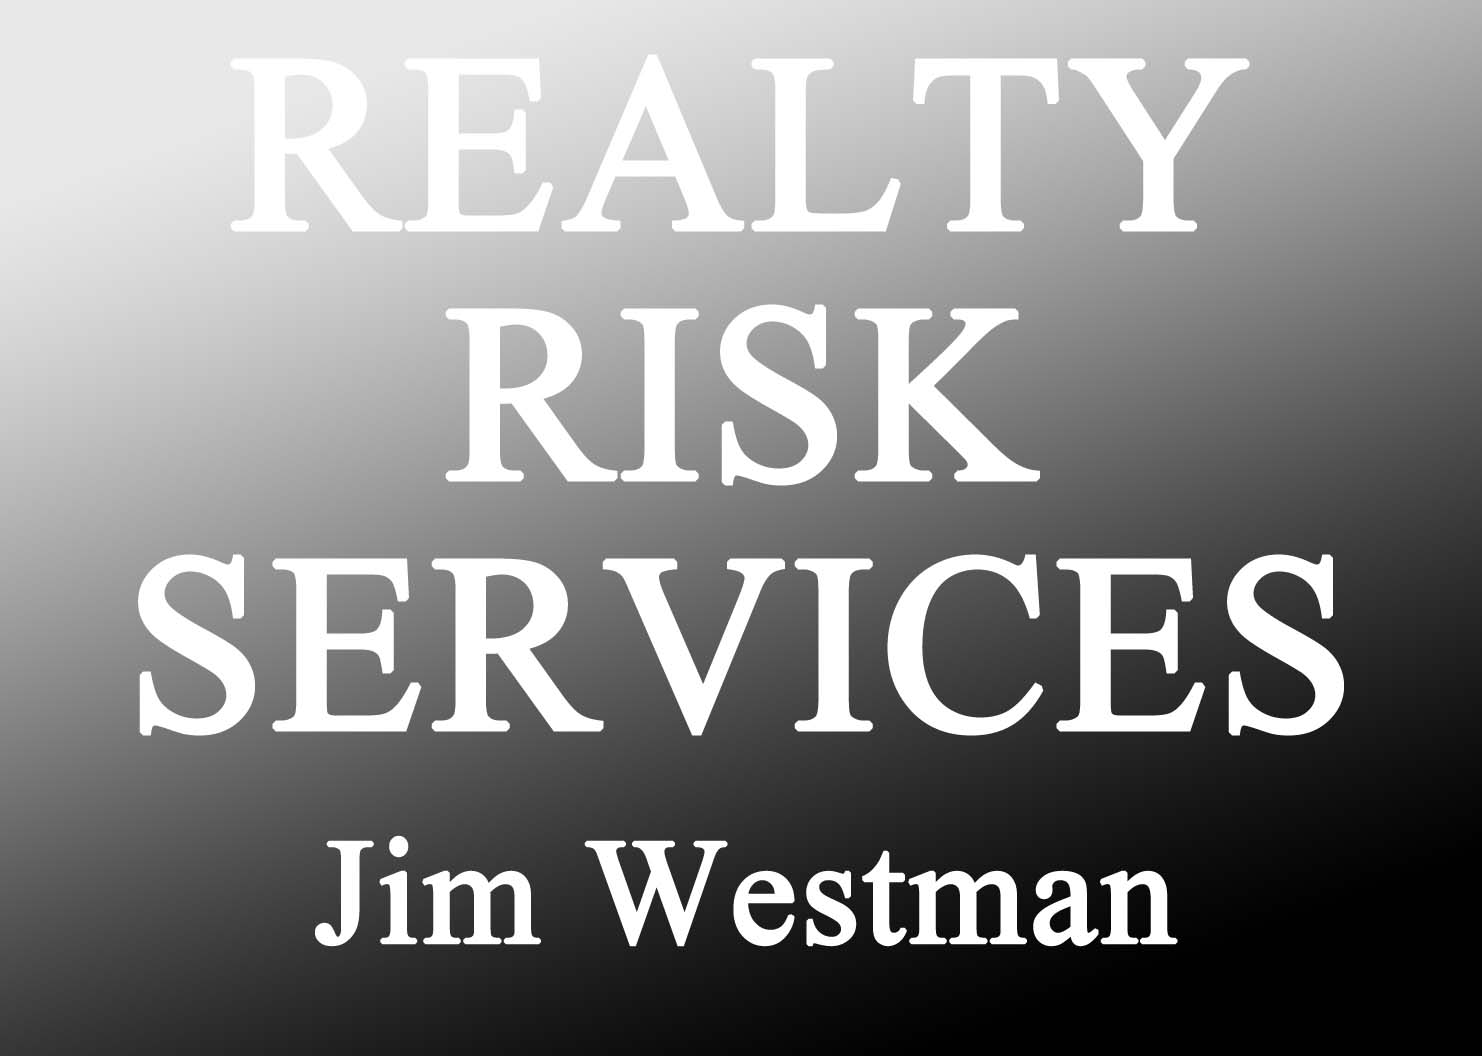 Realty Risk Services.jpg